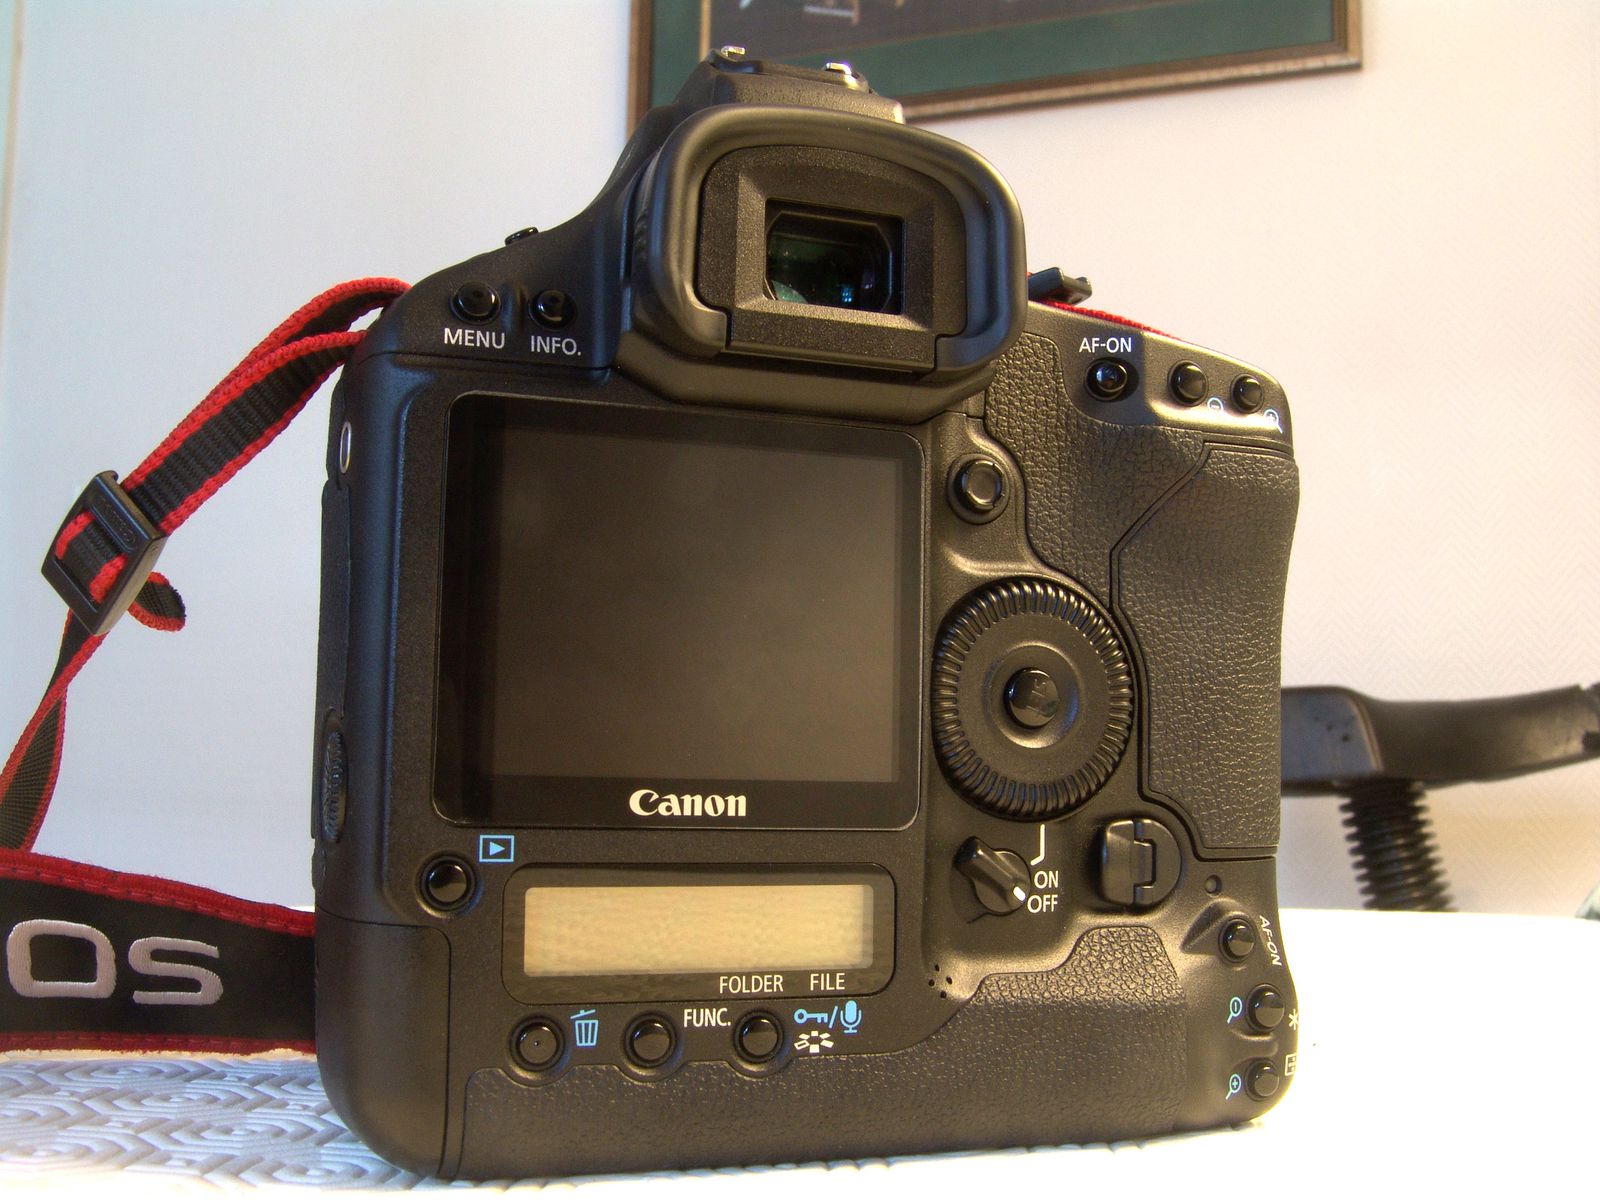 http://idata.over-blog.com/2/47/20/28/Annonce-canon-ds/Annonce-canon-ds06167.jpg